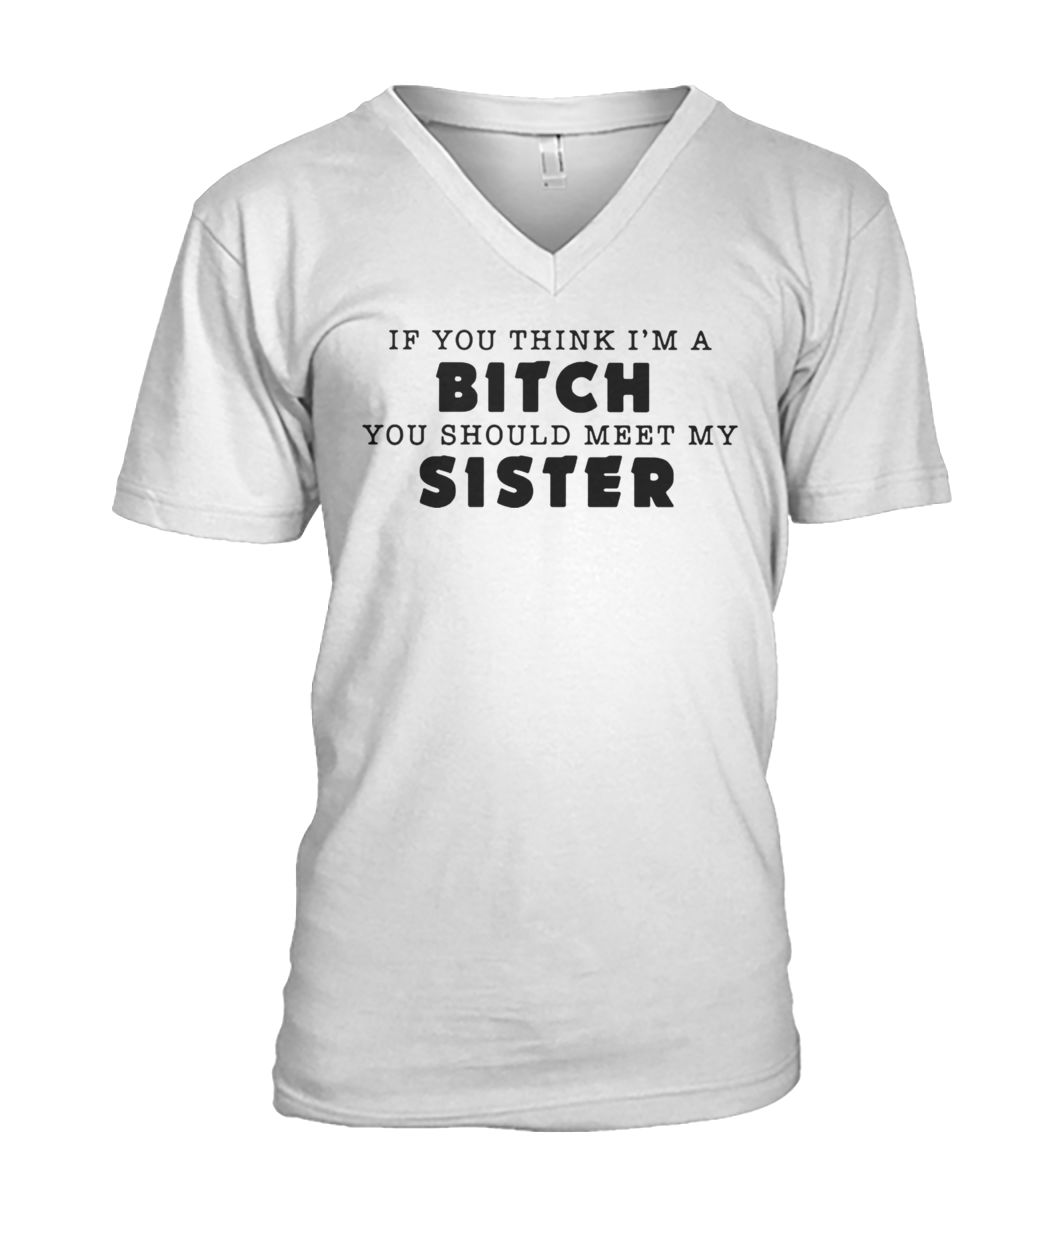 If you think I'm a bitch you should meet my sister mens v-neck